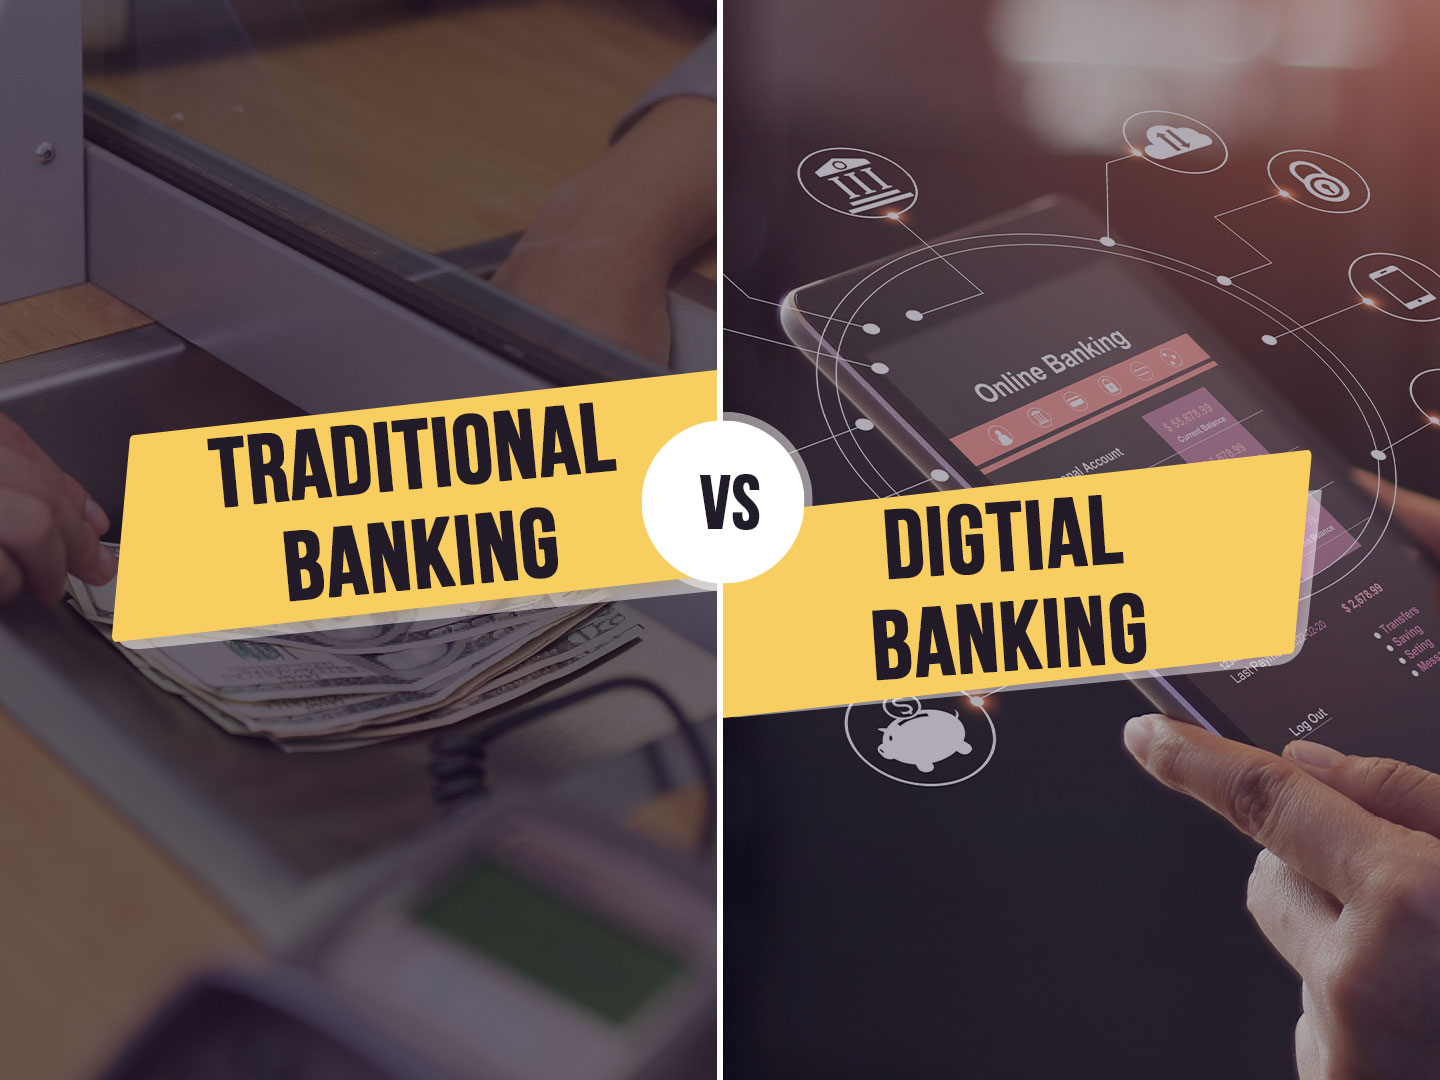 online banking vs traditional banking essay